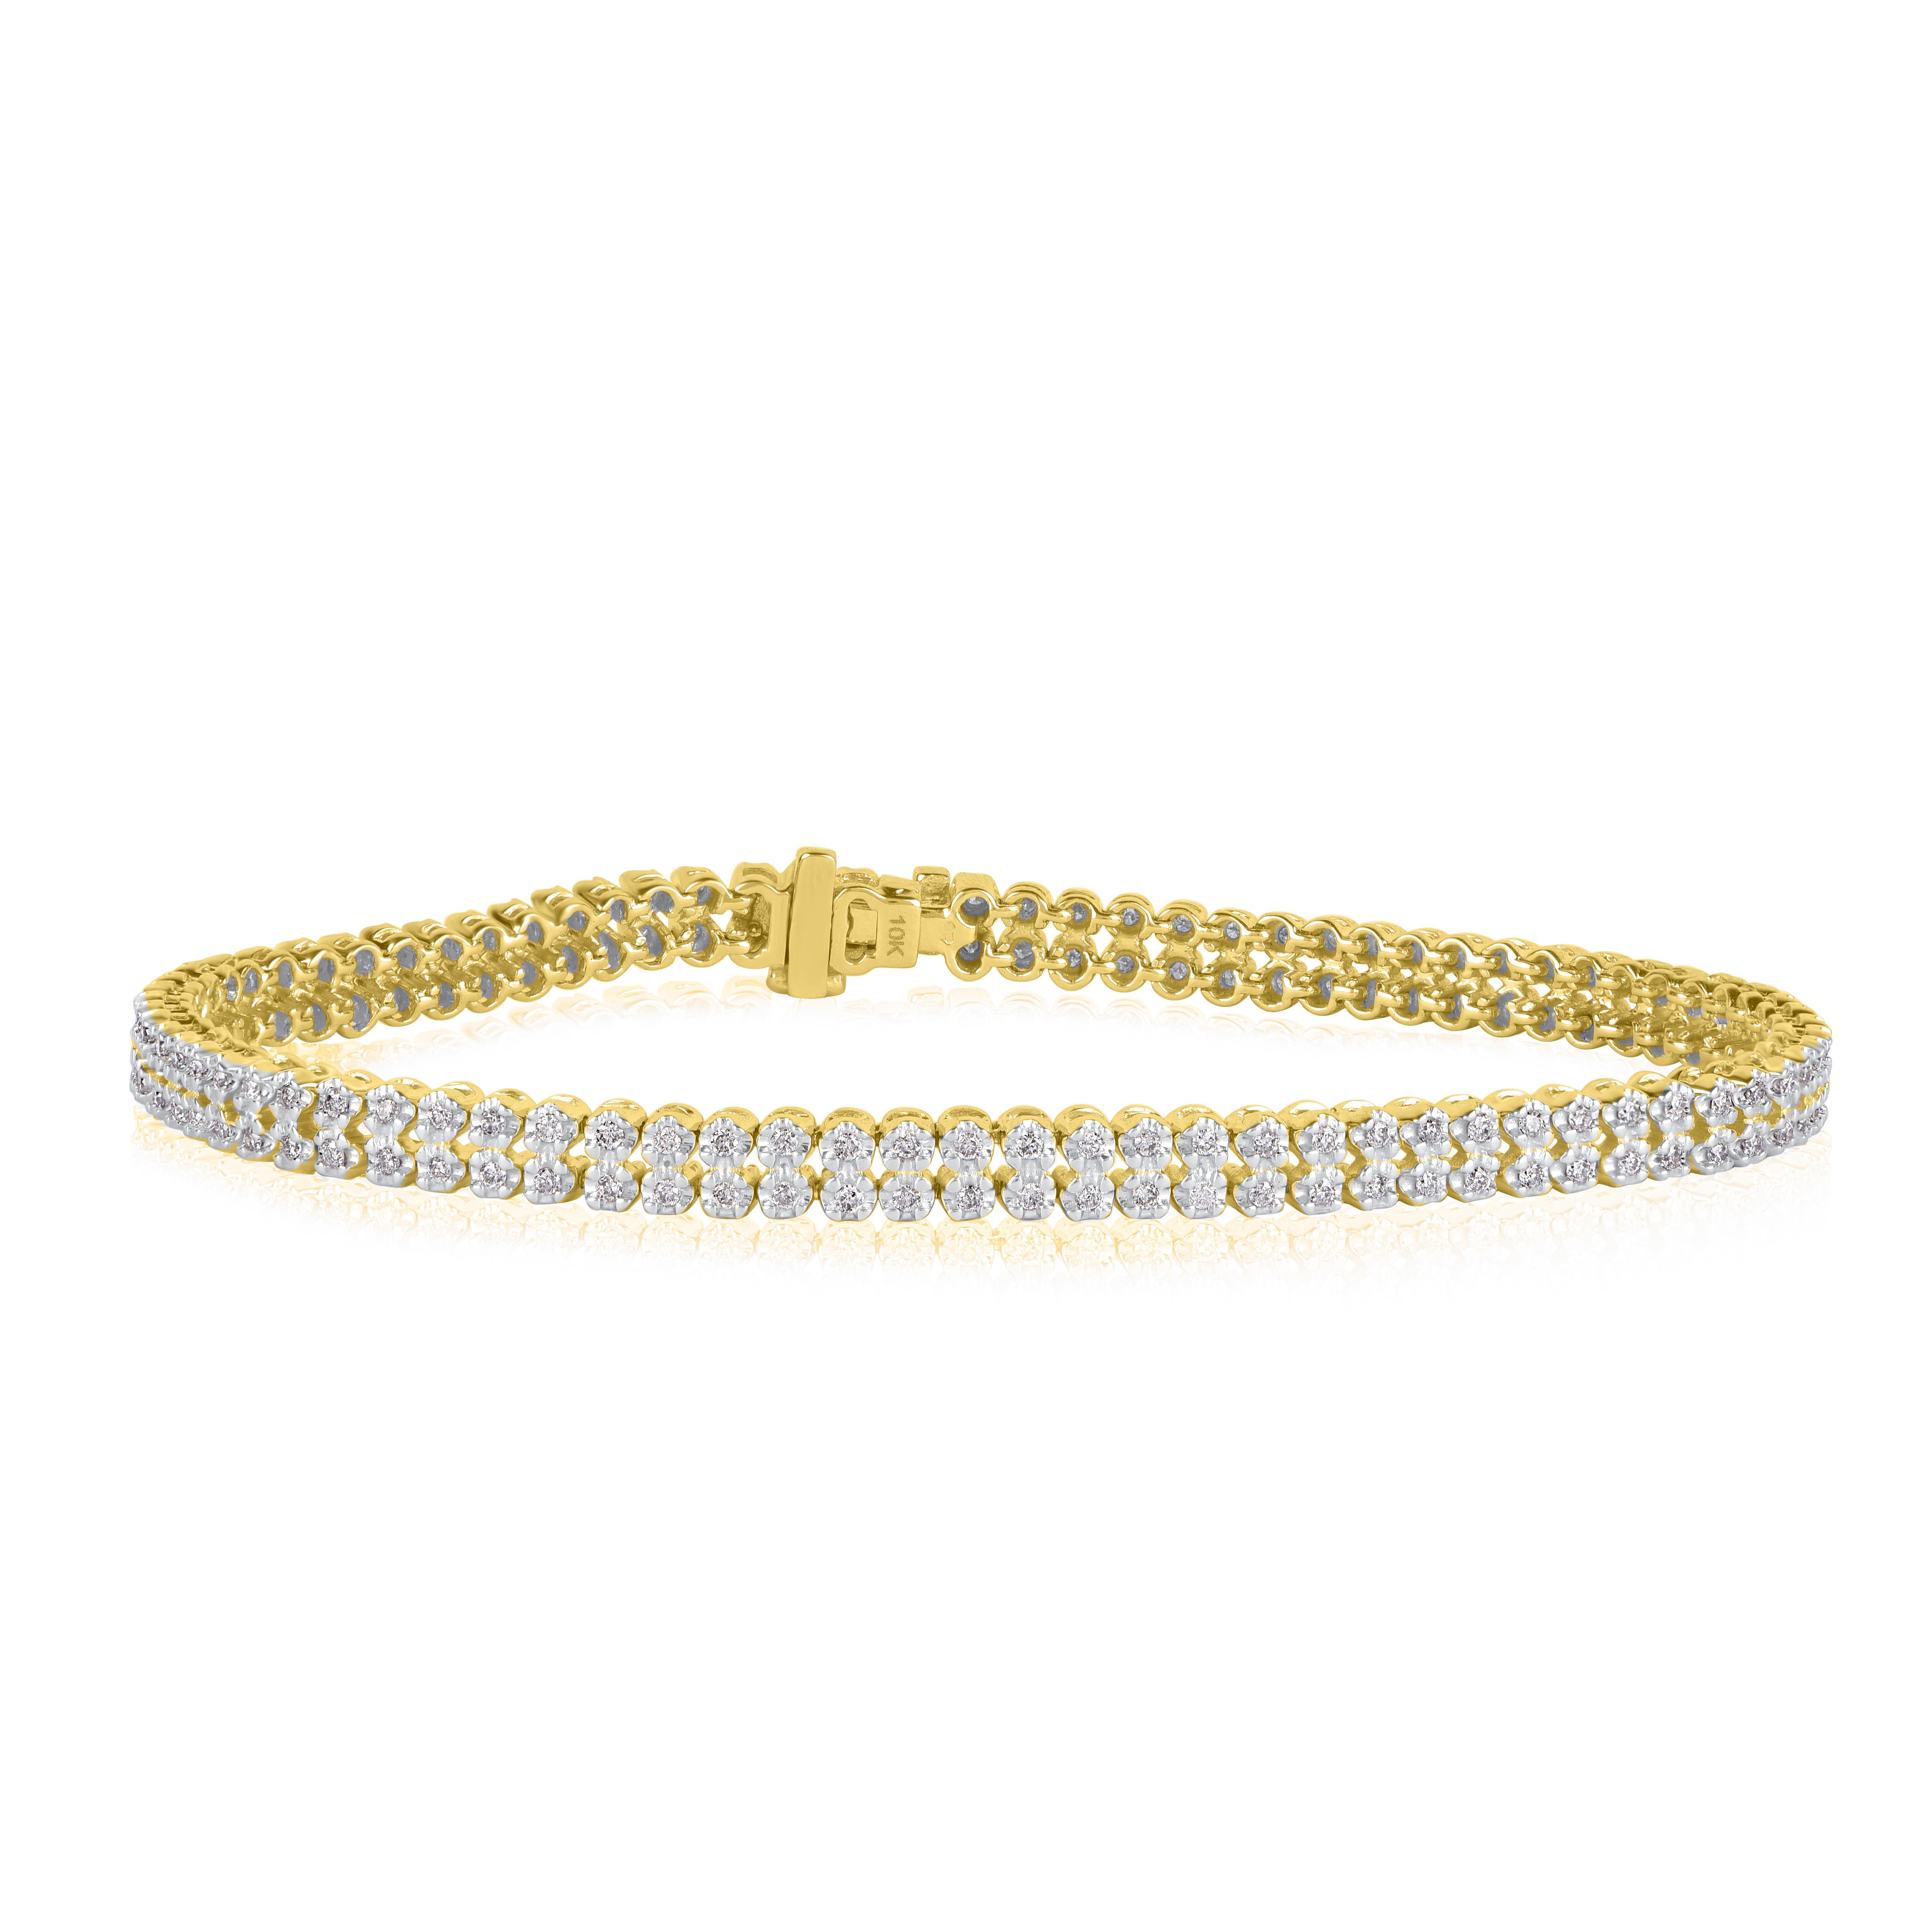 A graceful addition to her wardrobe, this double row diamond tennis bracelet brings the perfect touch of sparkle to her look. Made by our inhouse experts in 14 karat yellow gold and studded with 166 round brilliant-cut diamond in prong setting. The